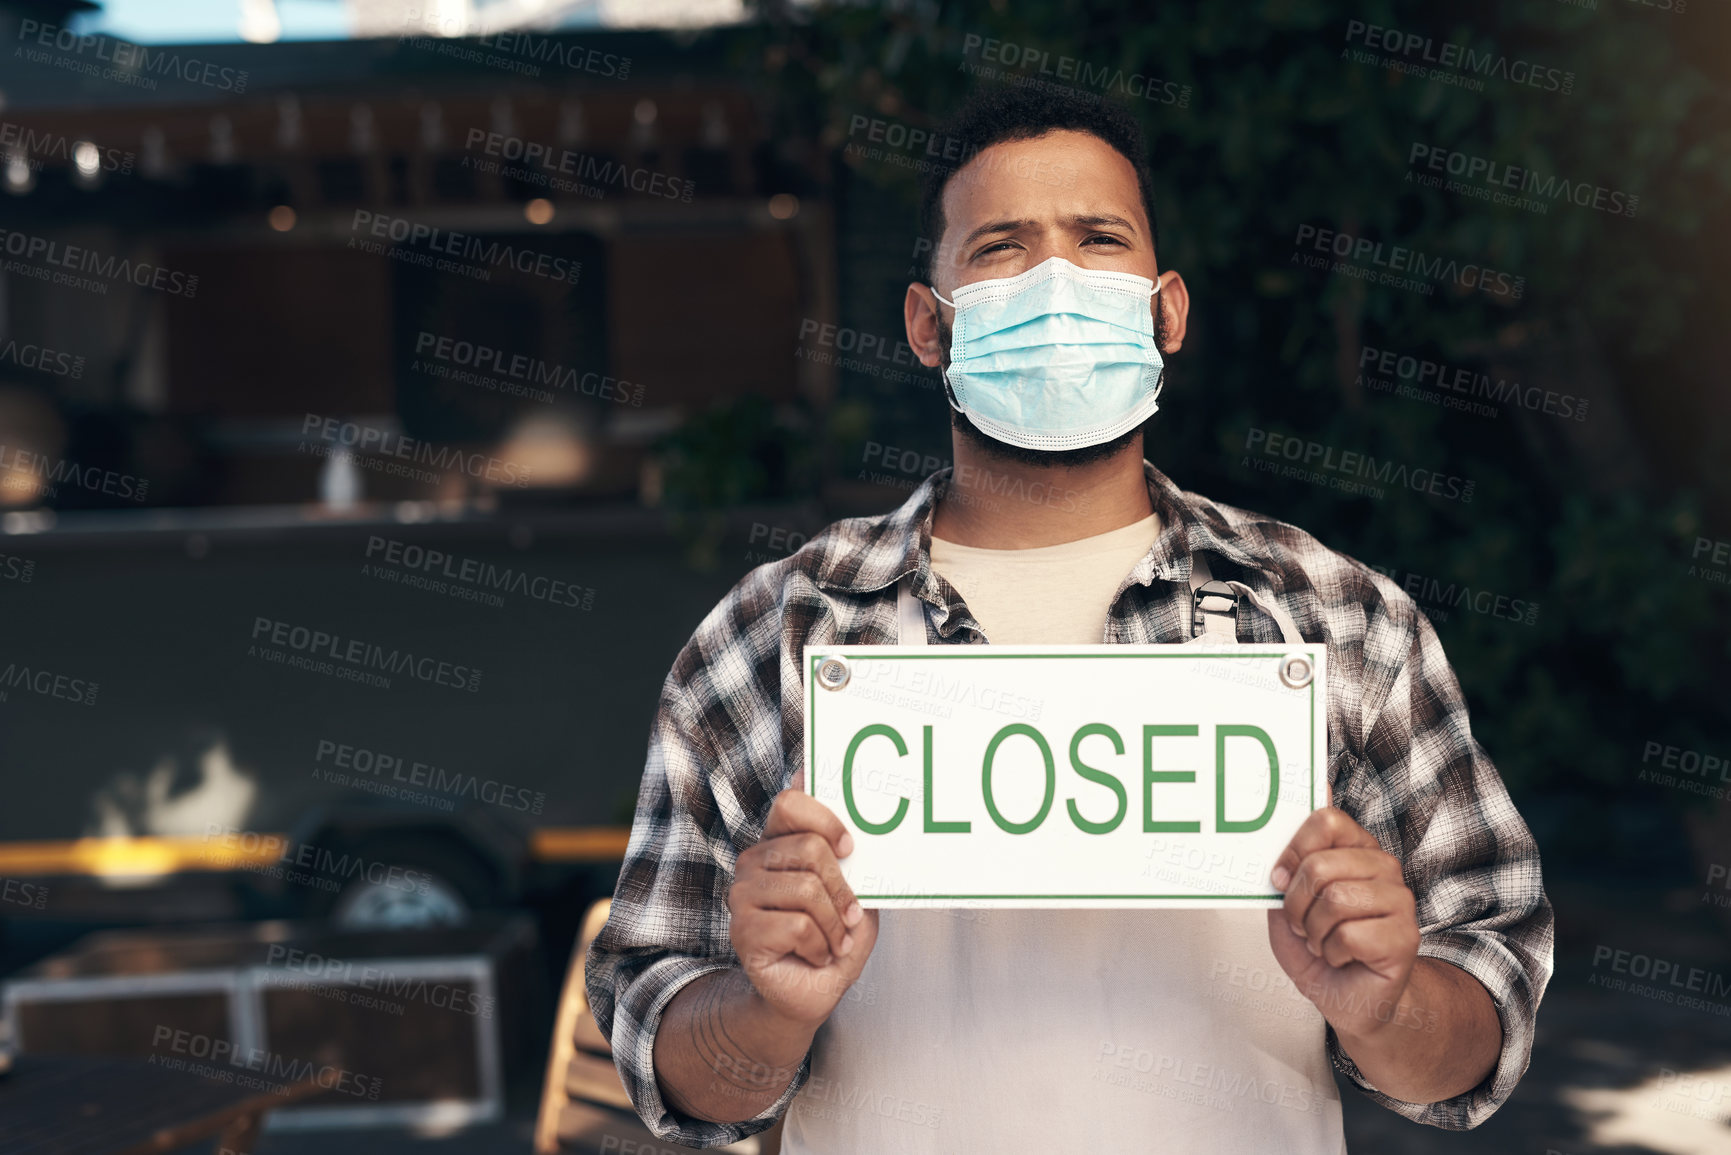 Buy stock photo Shot of a young man standing outside his restaurant and wearing a face mask while holding a closed sign